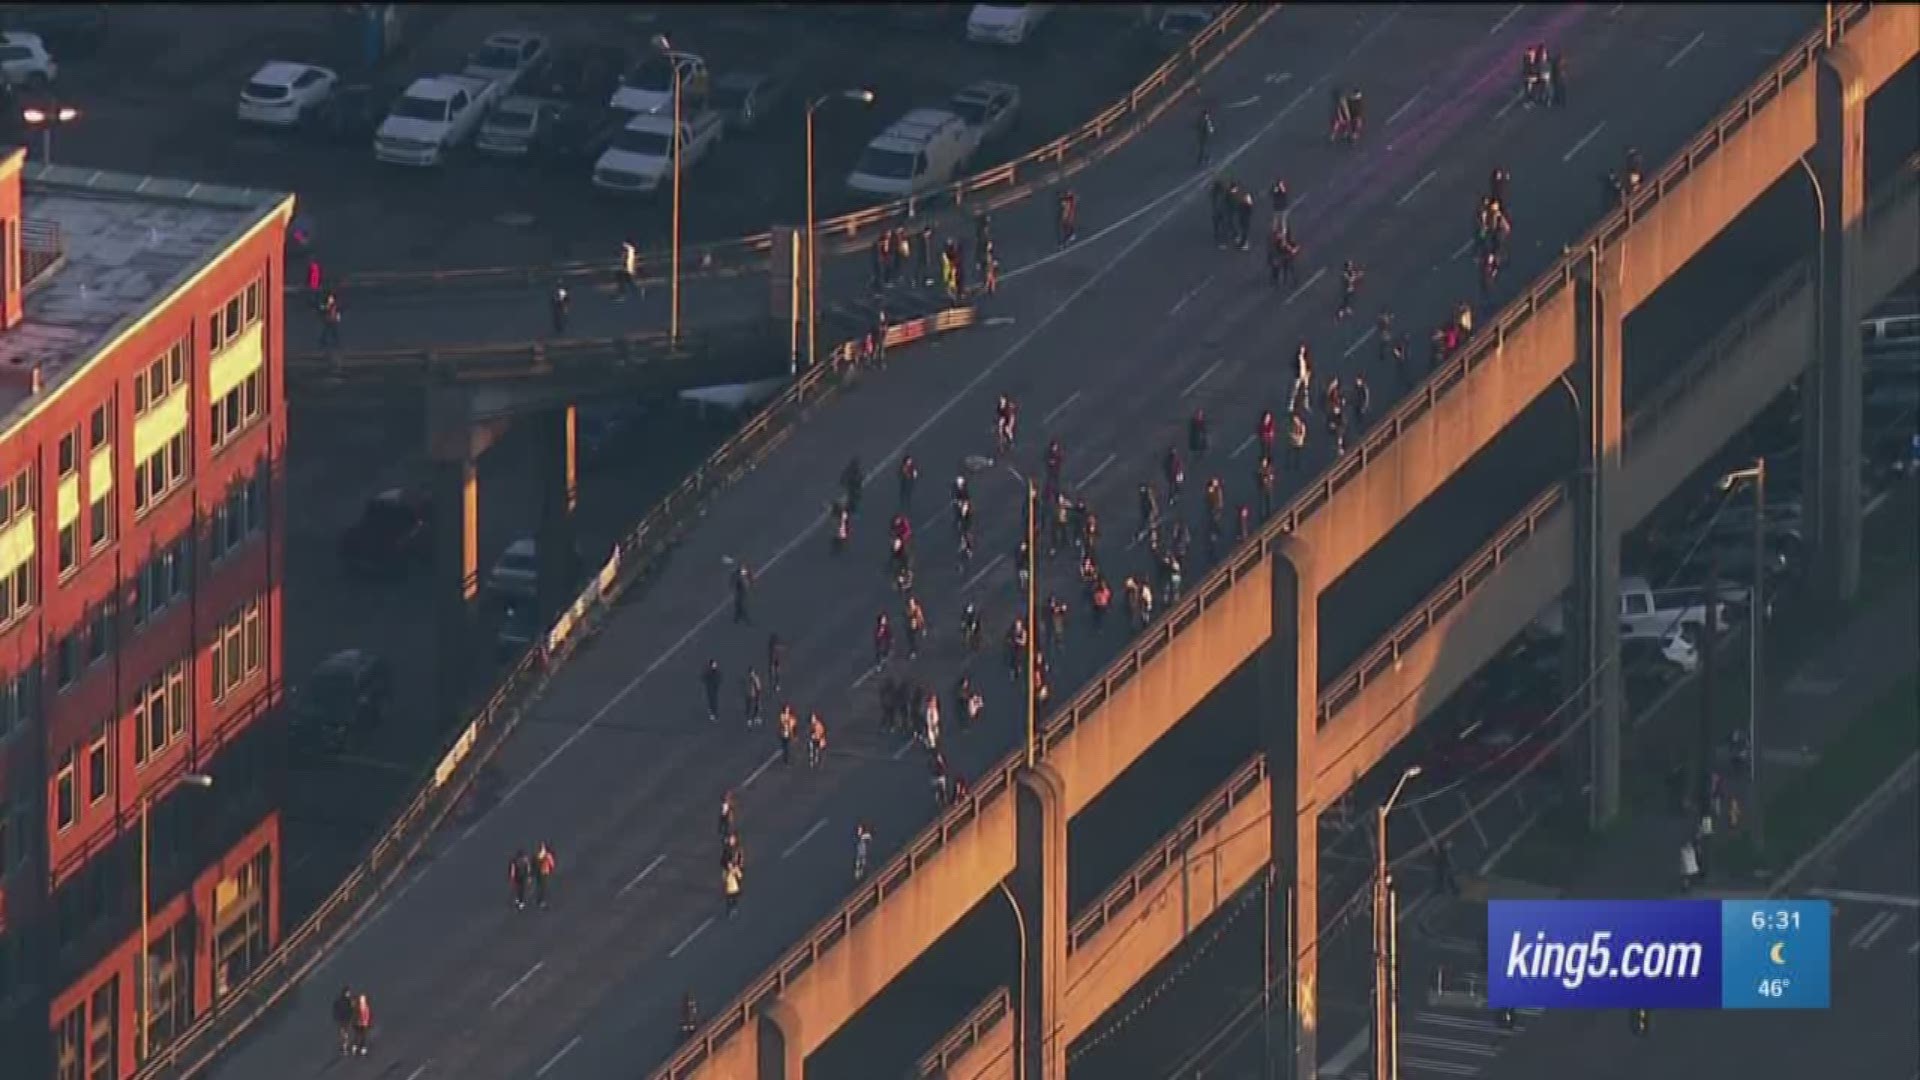 People keep going on the closed viaduct, and transportation leaders want them to stay off for their own safety.